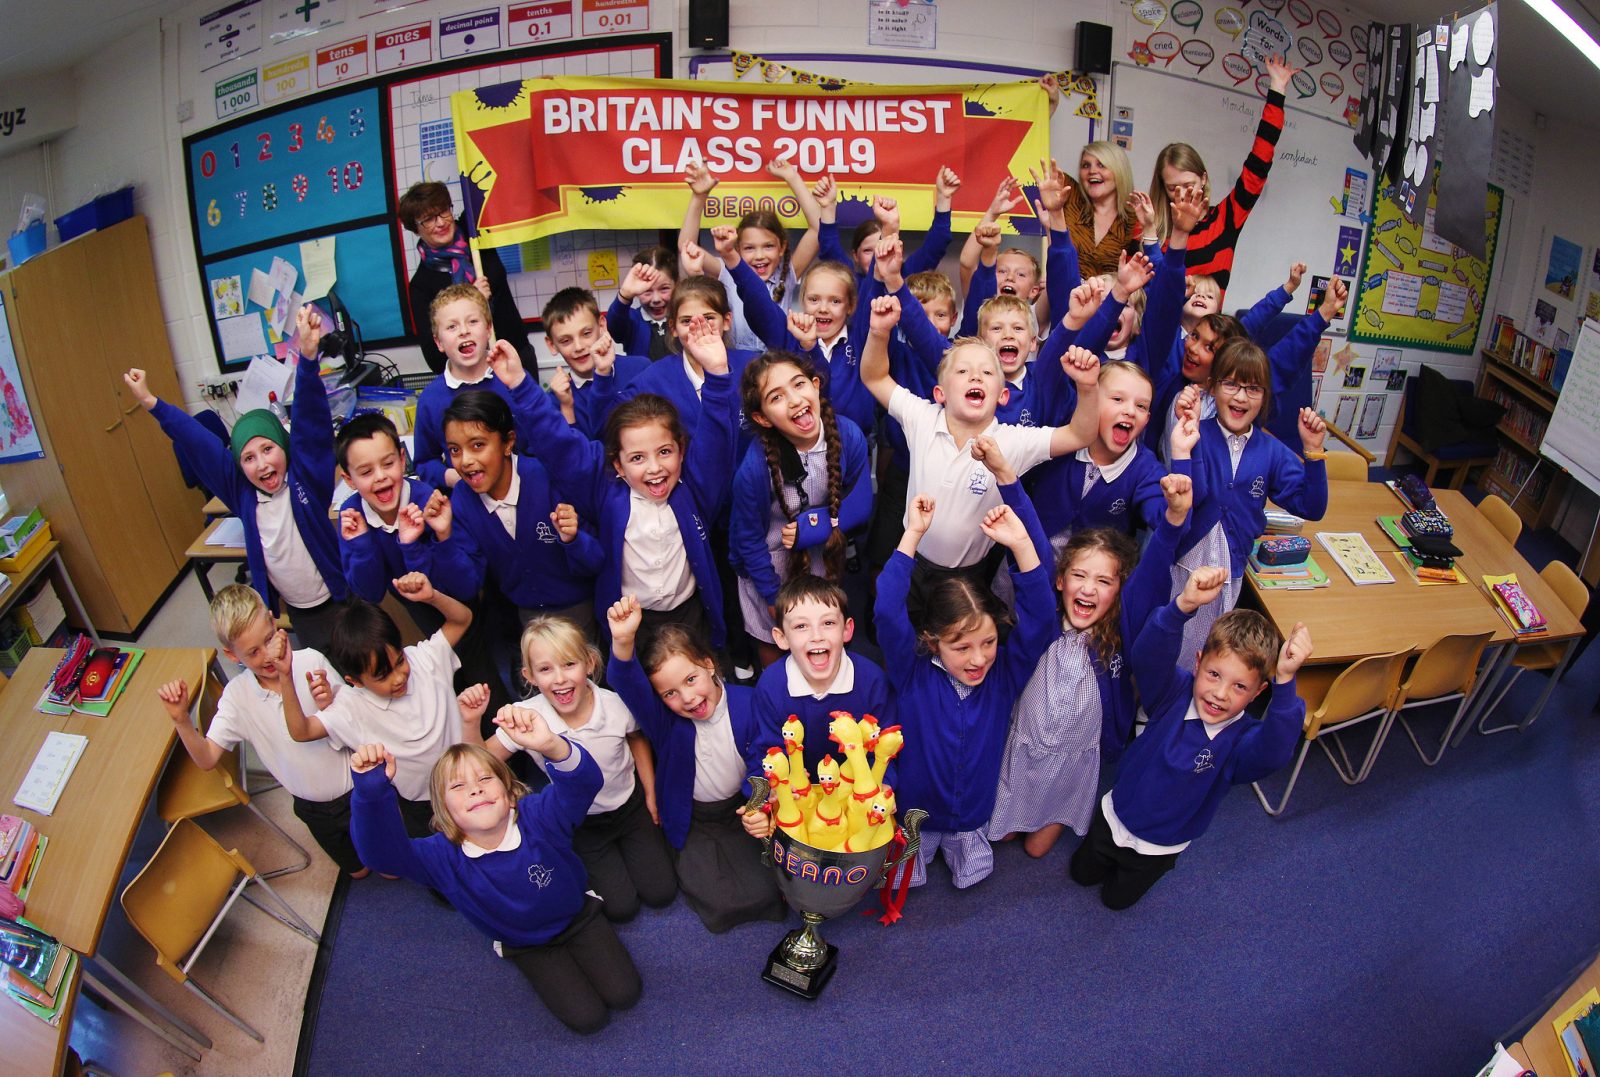 Foxes class from Castlewood Primary in Horsham, West Sussex have today been revealed as the winners of Beano’s Britain’s Funniest Class national joke competition